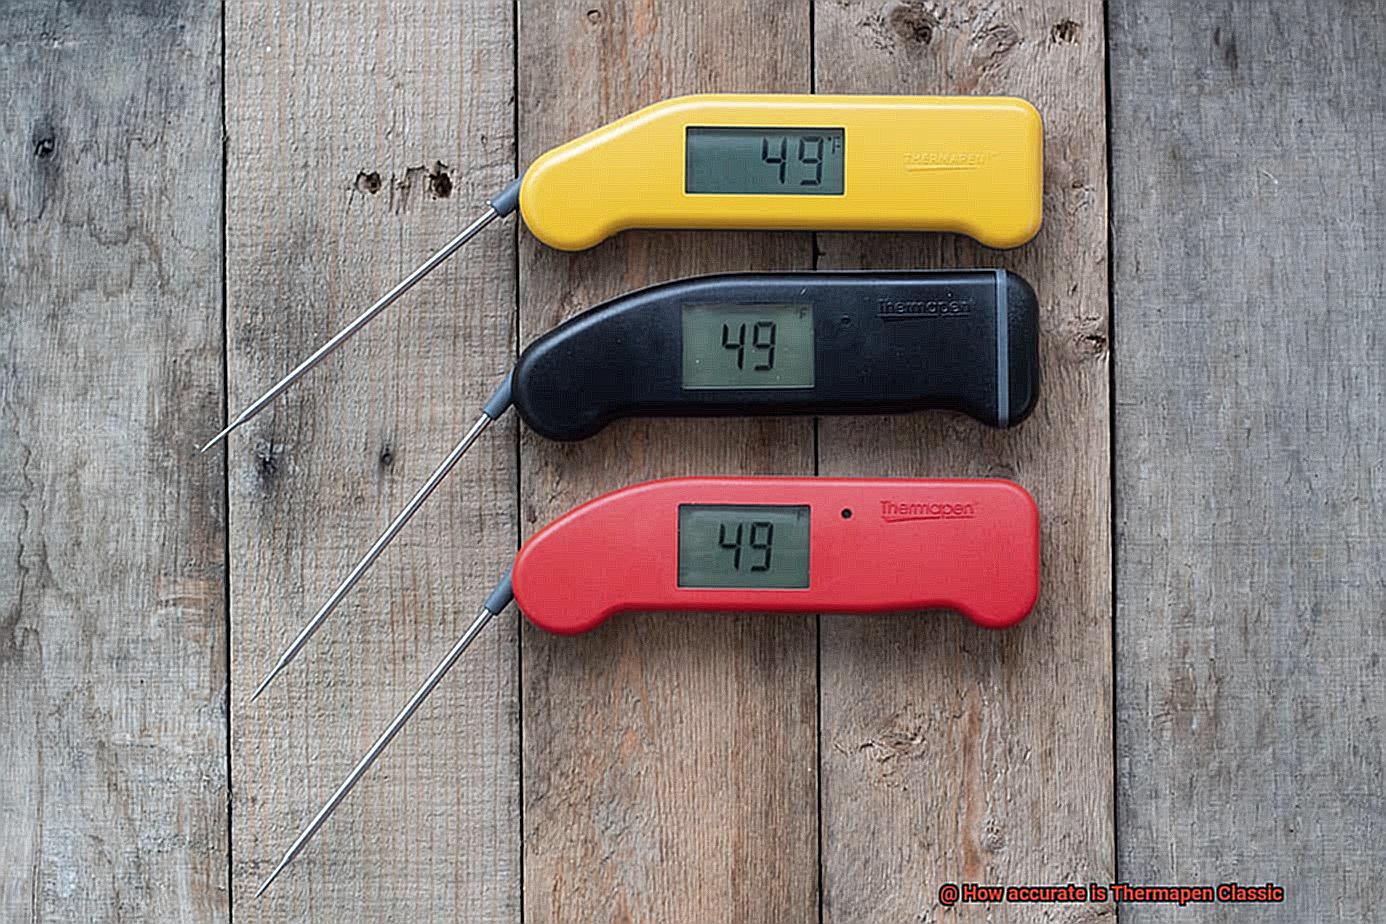 How accurate is Thermapen Classic-6